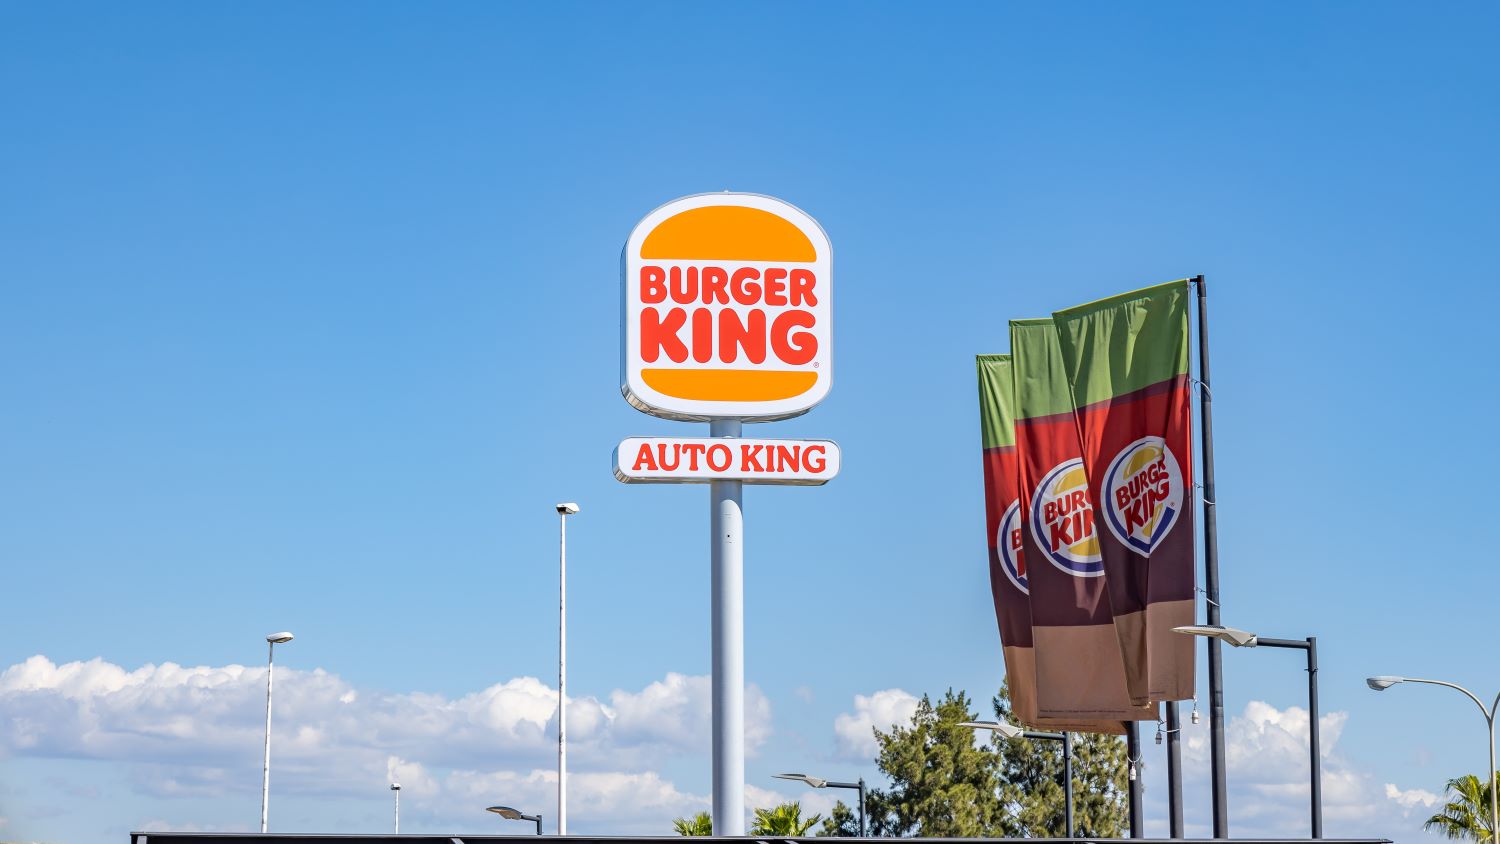 More than 200 Burger King stores will close this year: what’s going on?